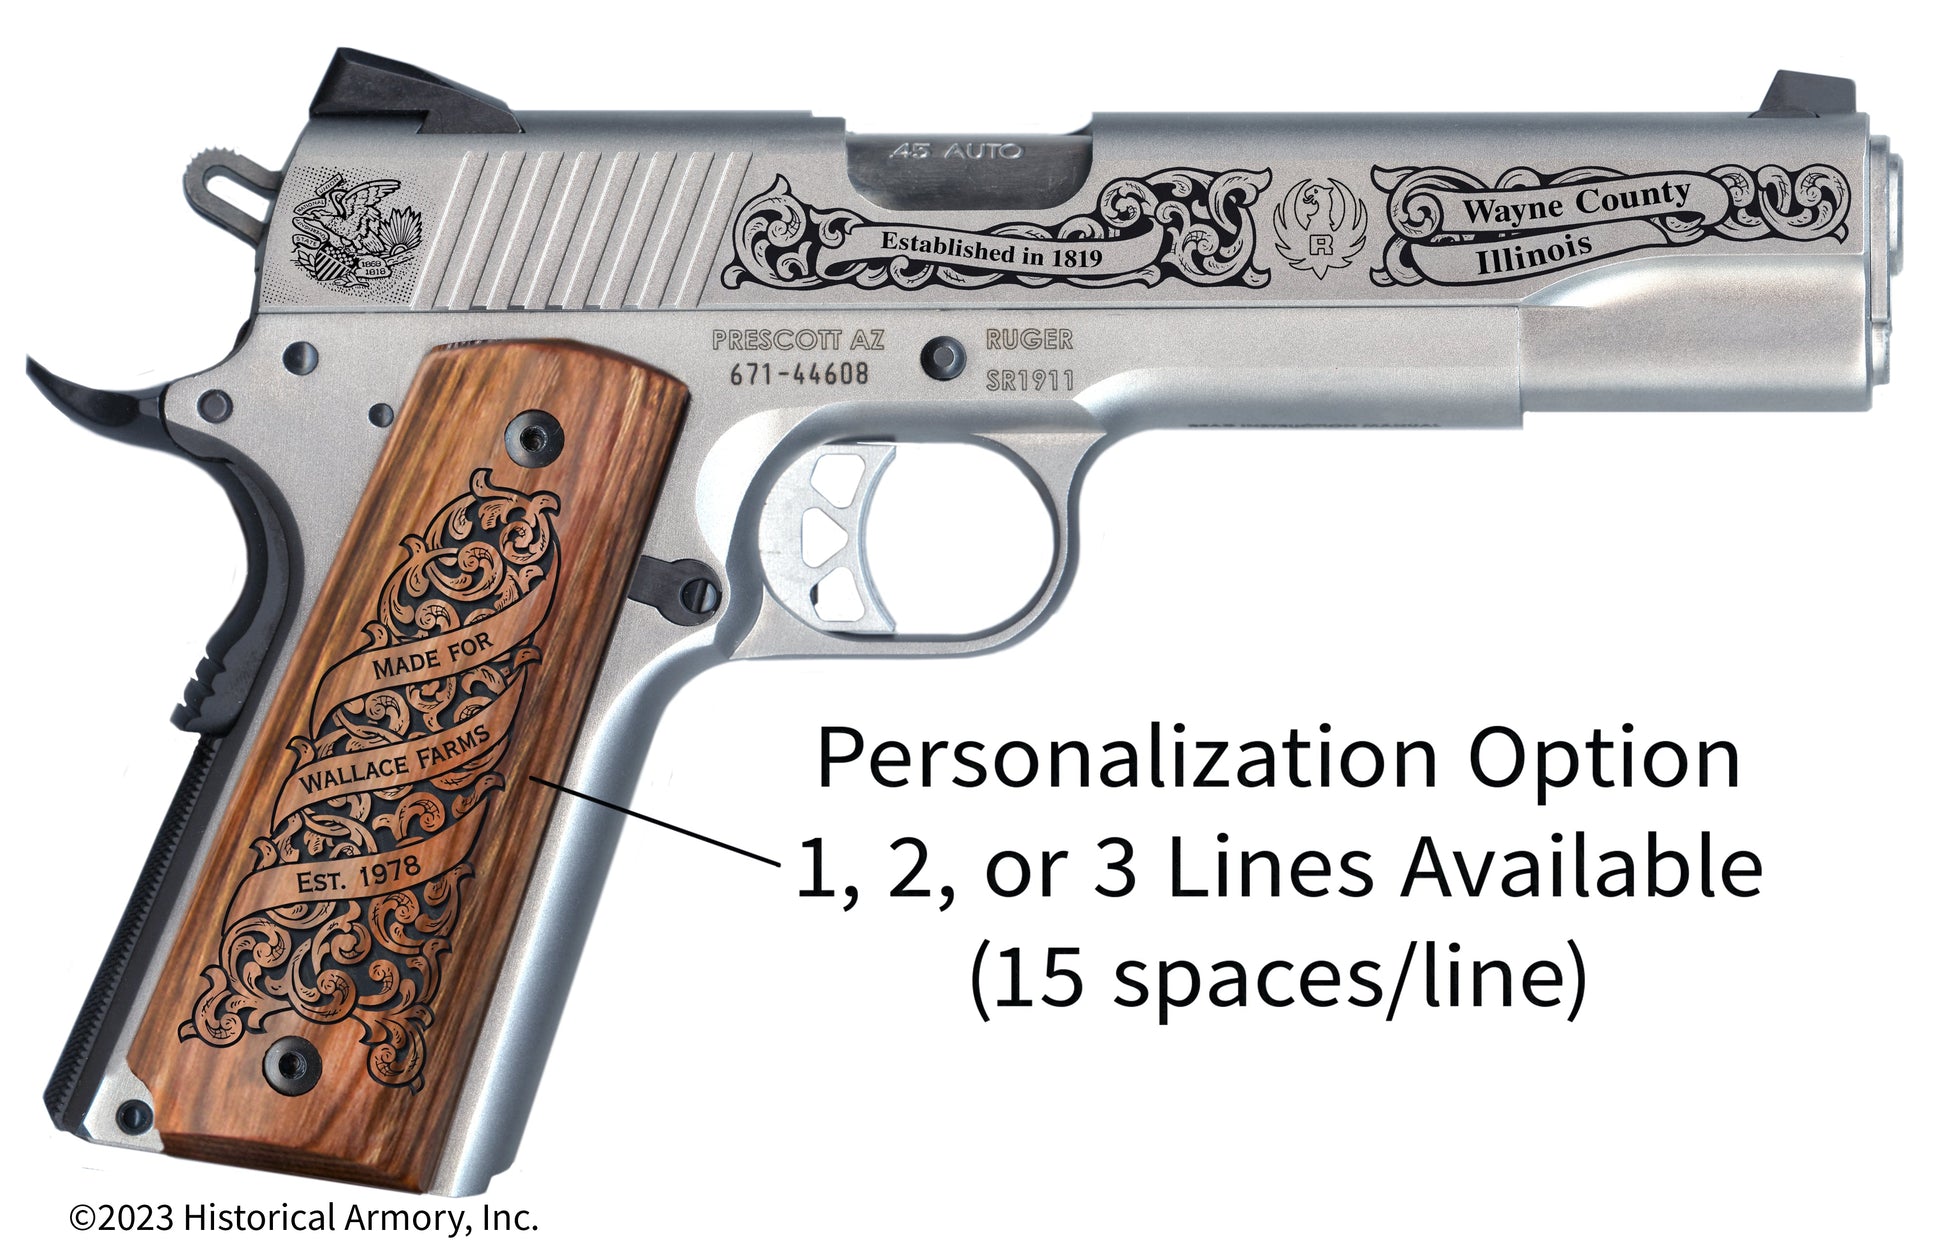 Wayne County Illinois Personalized Engraved .45 Auto Ruger 1911